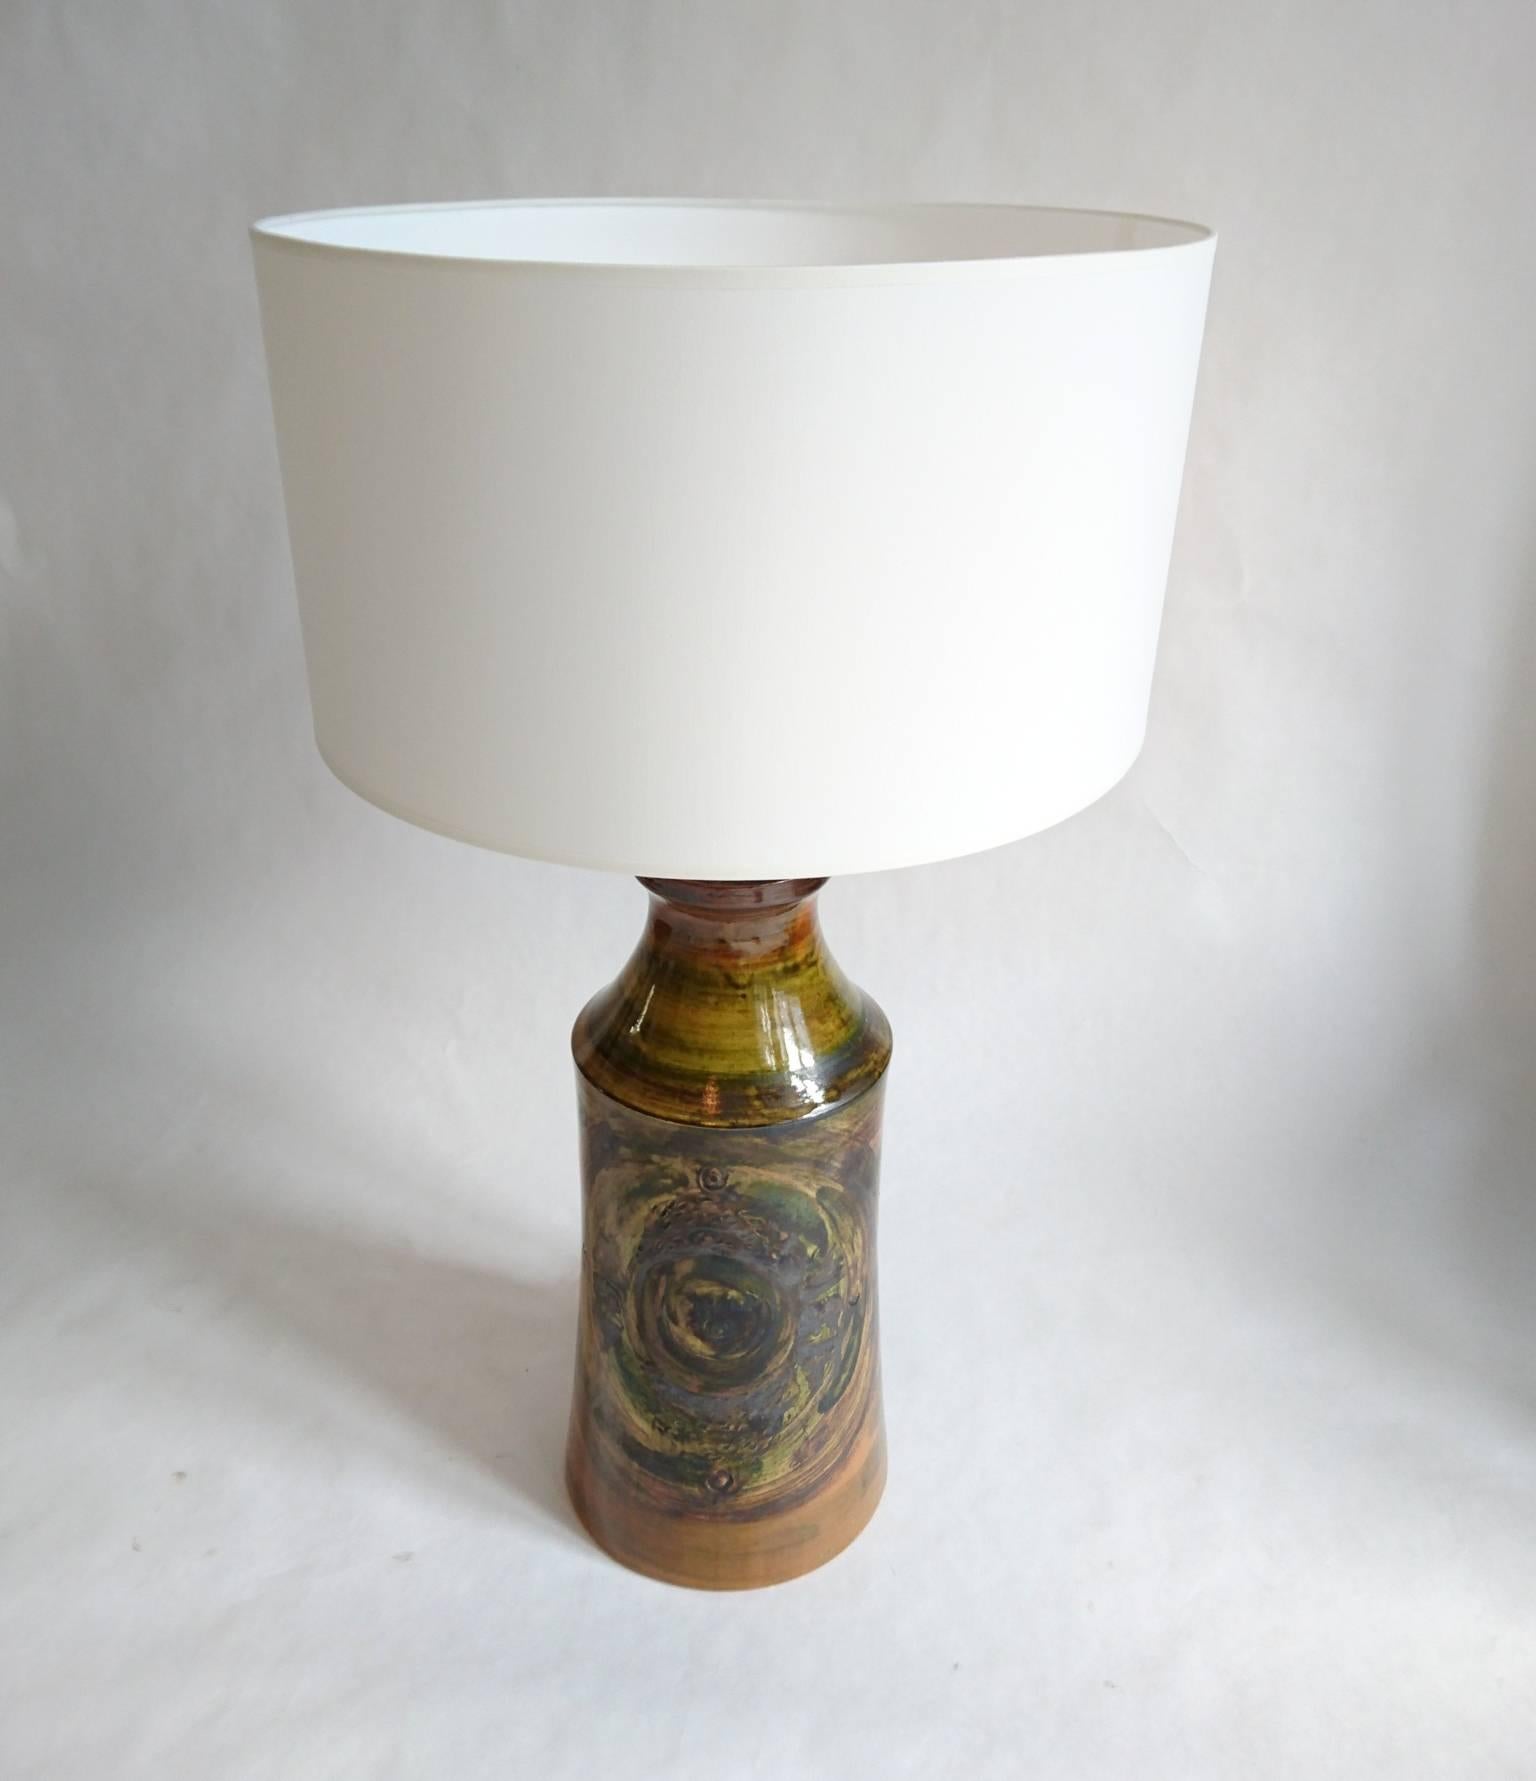 This Swedish handmade ceramic table lamp which is not only fantastic but also cool and striking. Has a multicolored hand painted decor in browns, greens and black. Comes with a brand new drum shade in cotton.